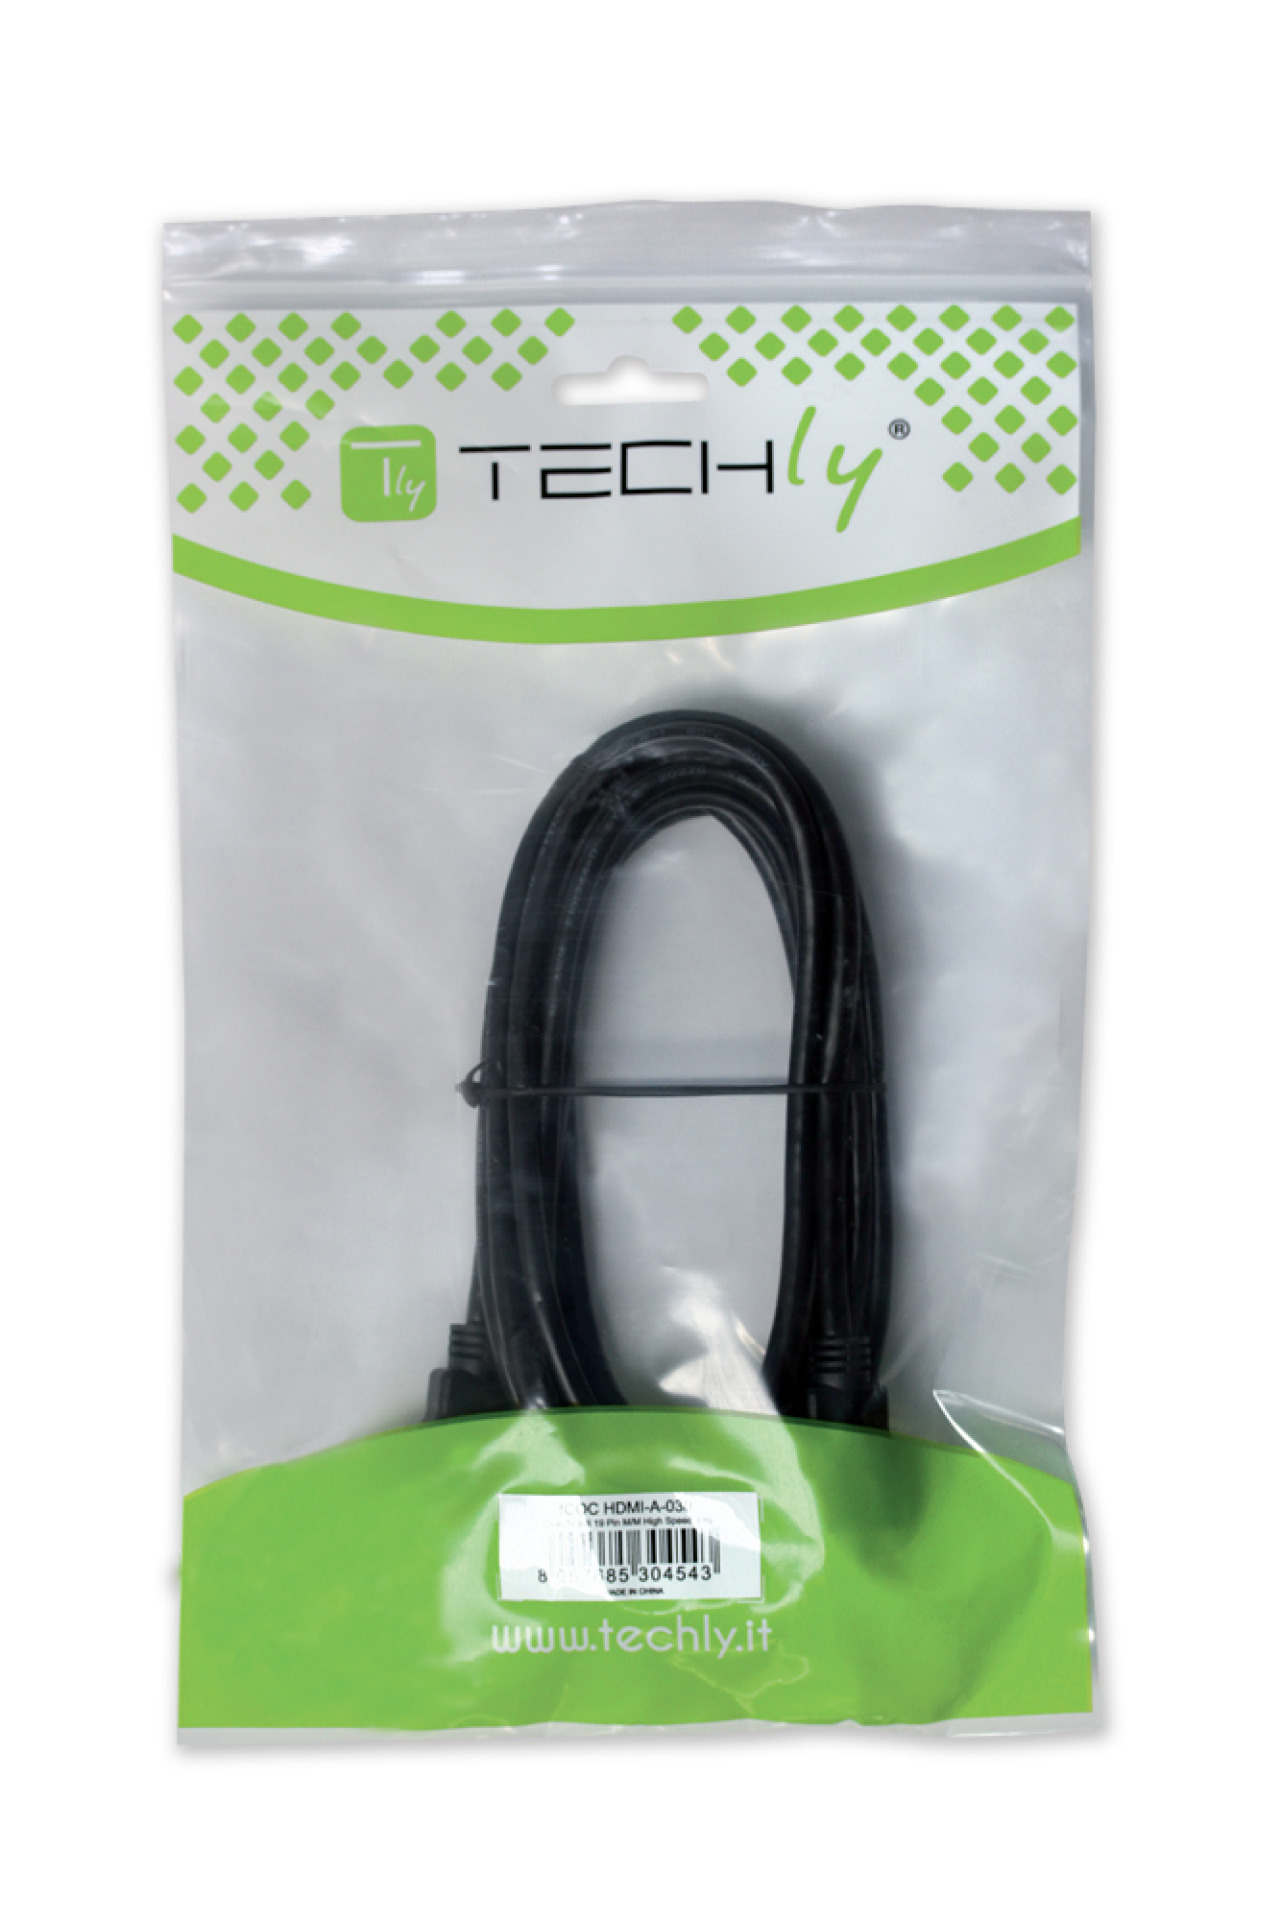 HDMI Cable with Ferrite 15m long